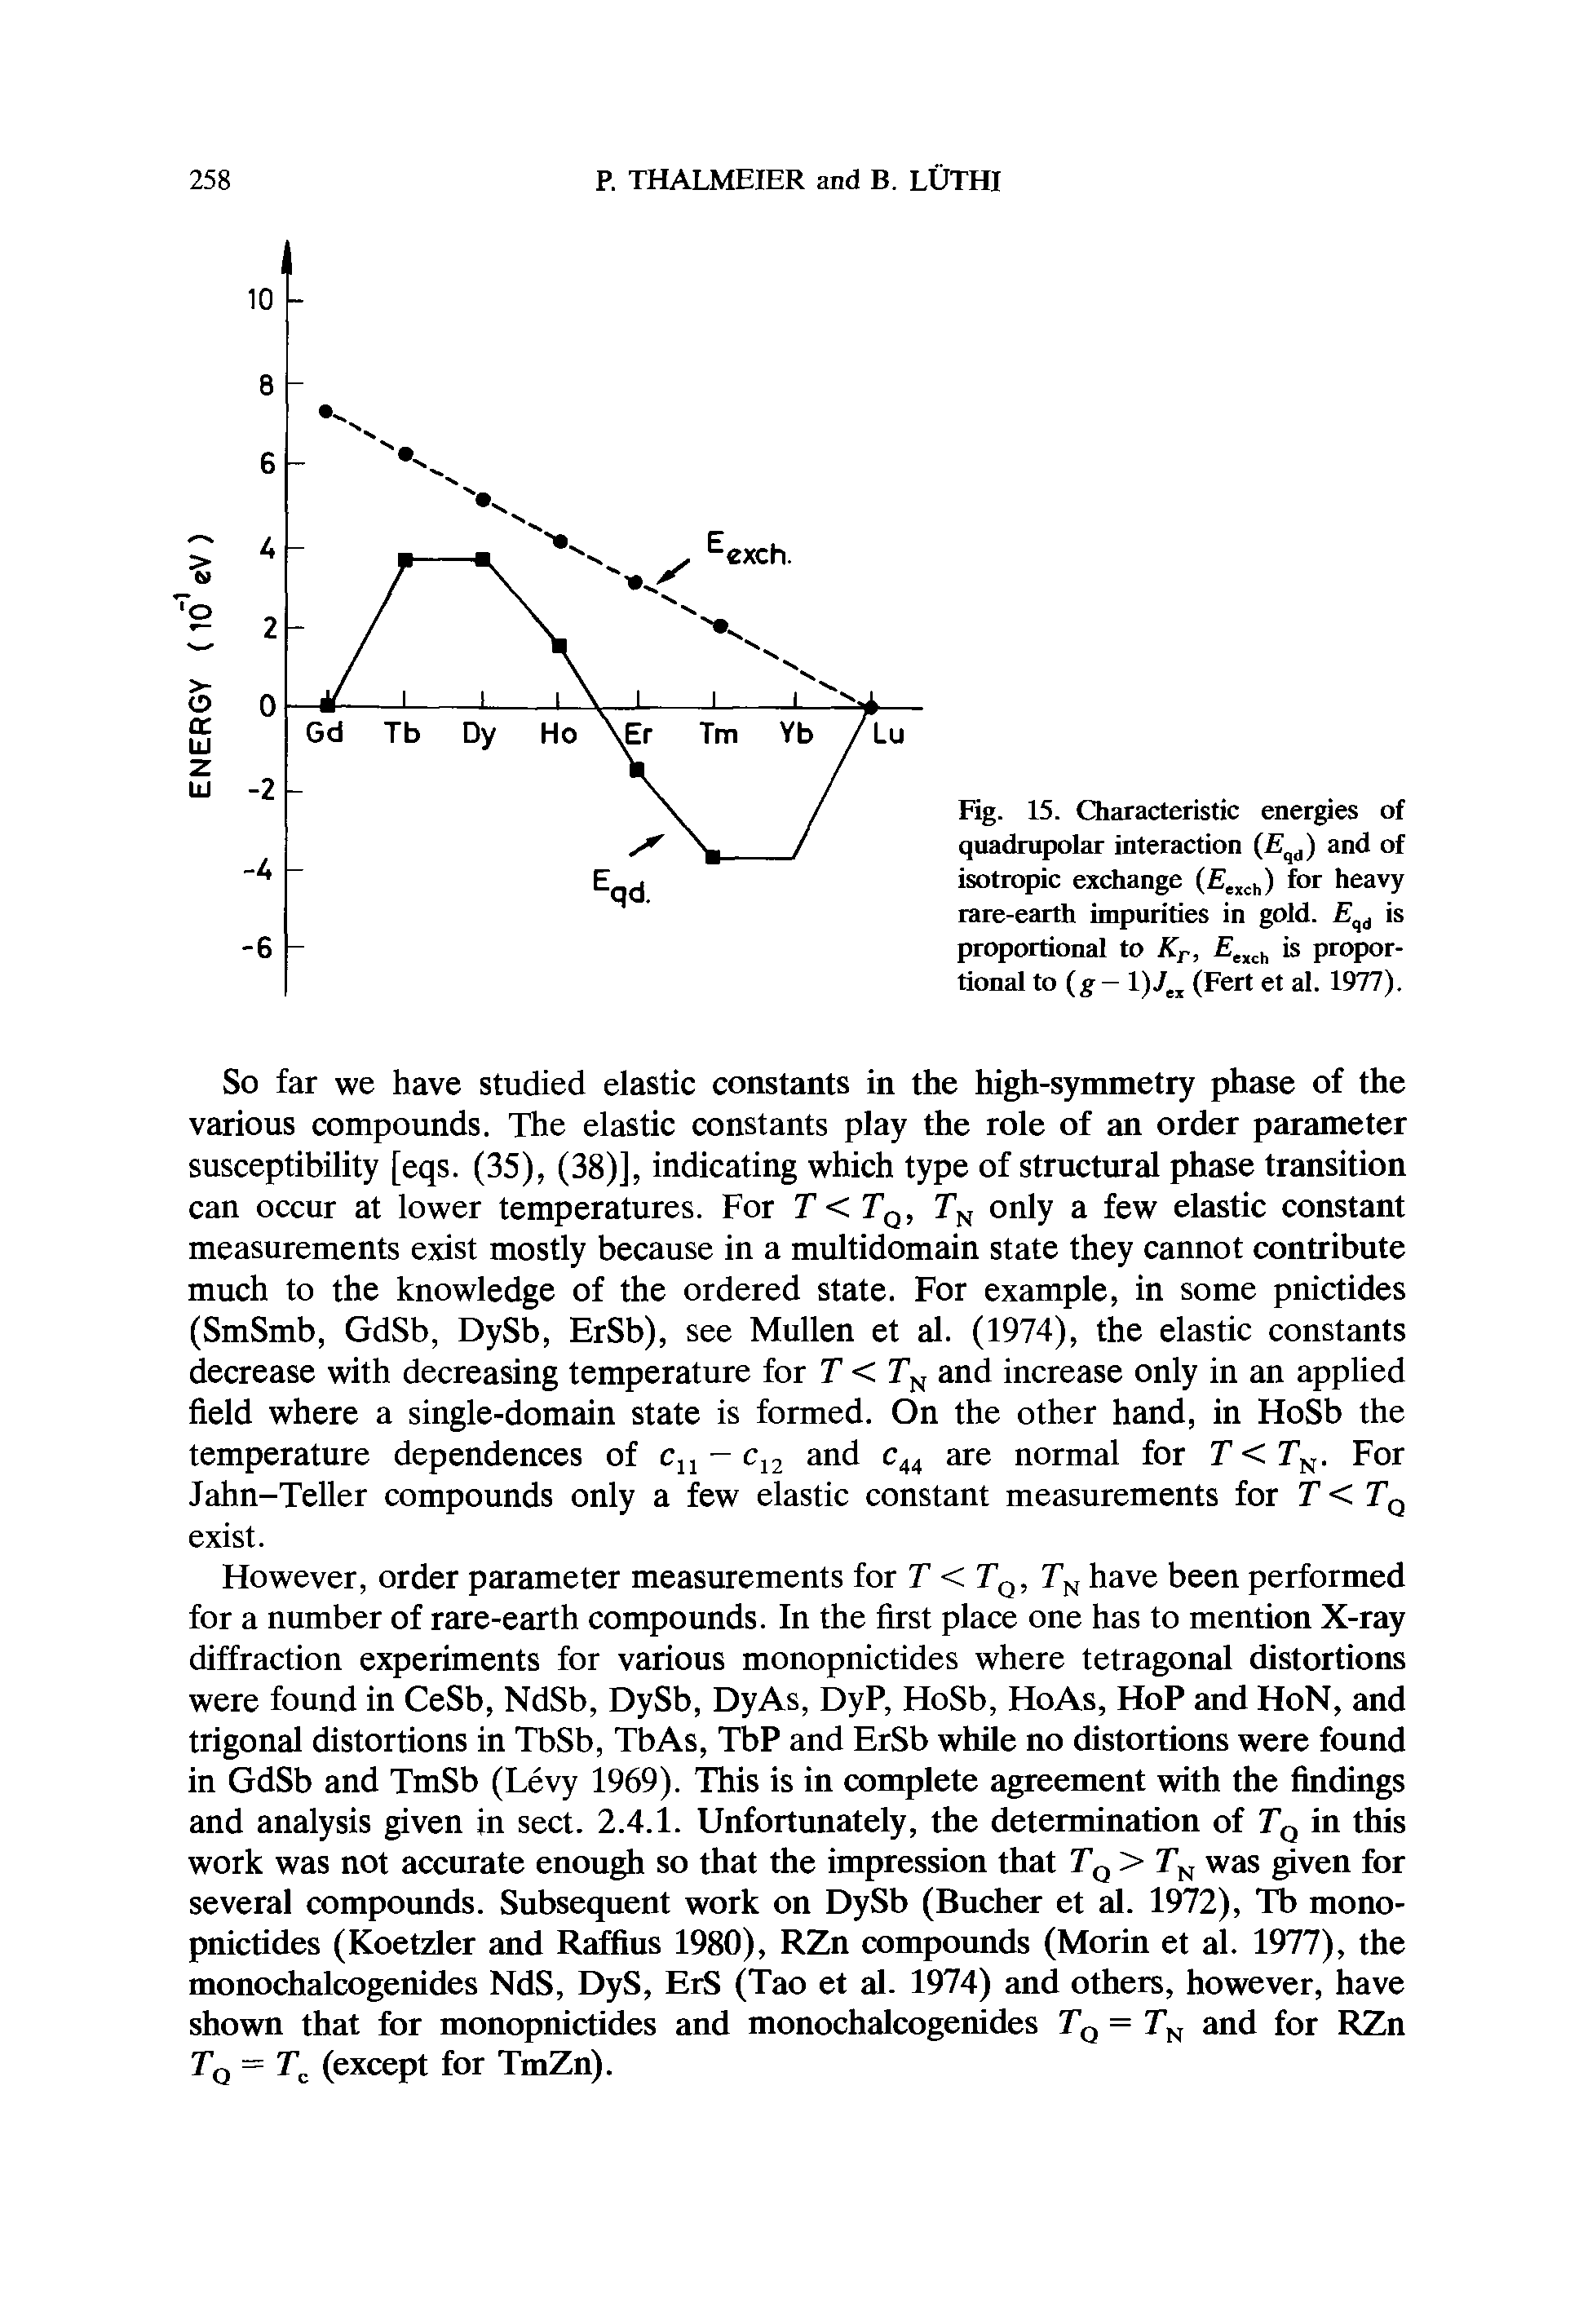 Fig. 15. Characteristic energies of quadrupolar interaction (E ) and of isotropic exchange (E.xch) for heavy rare-earth impurities in gold. is proportional to Kr, exch is proportional to (g - 1)J (Fert et al. 1977).